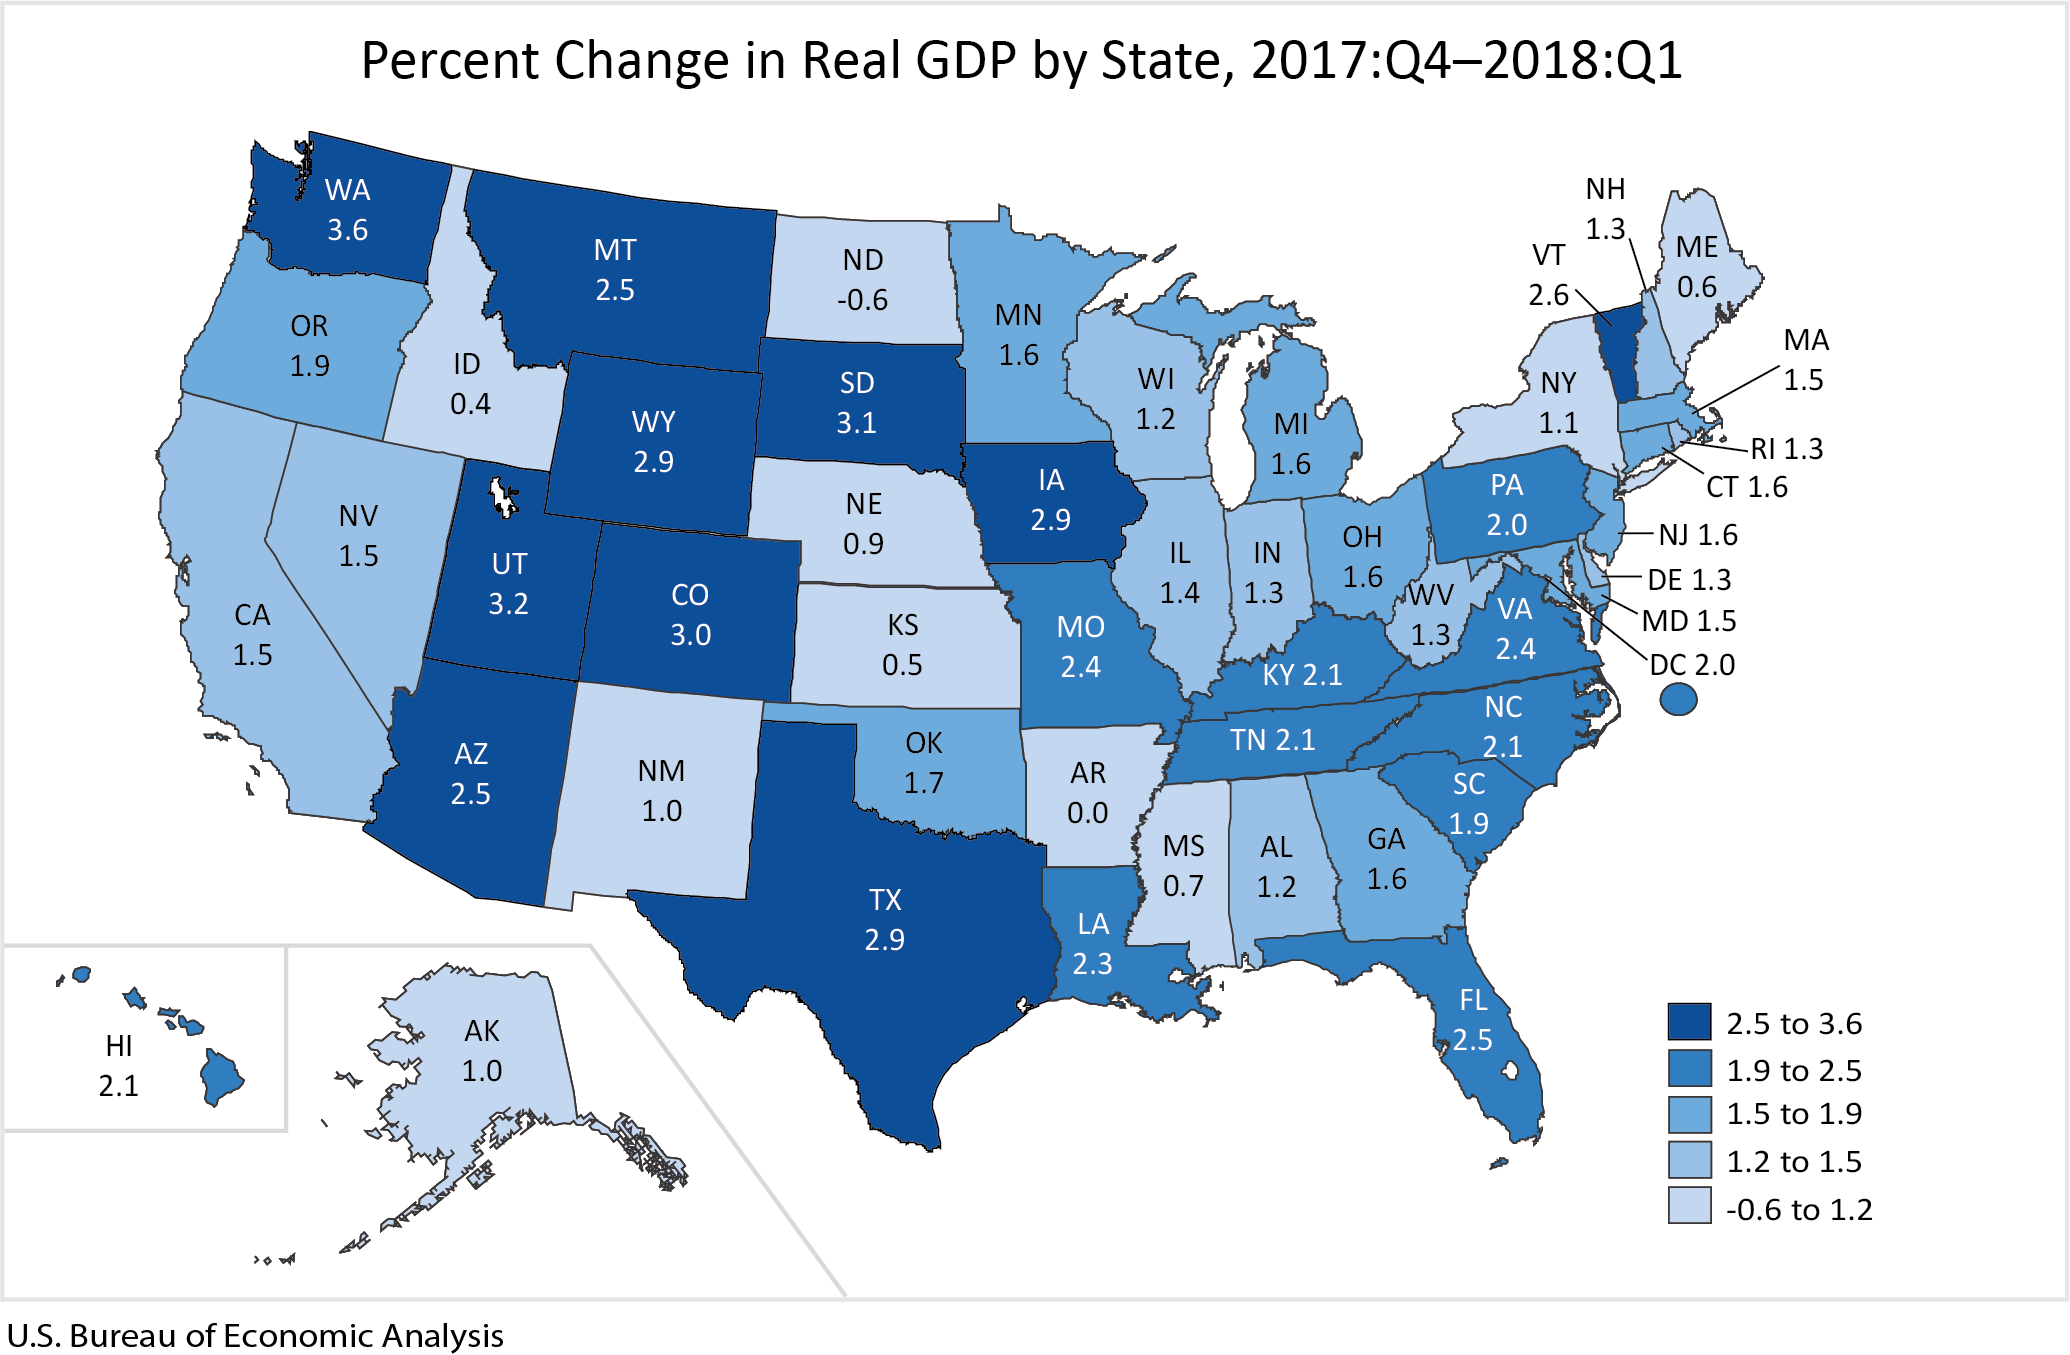 Percent change in real gdp by state 2017:Q4 - 2018:Q1